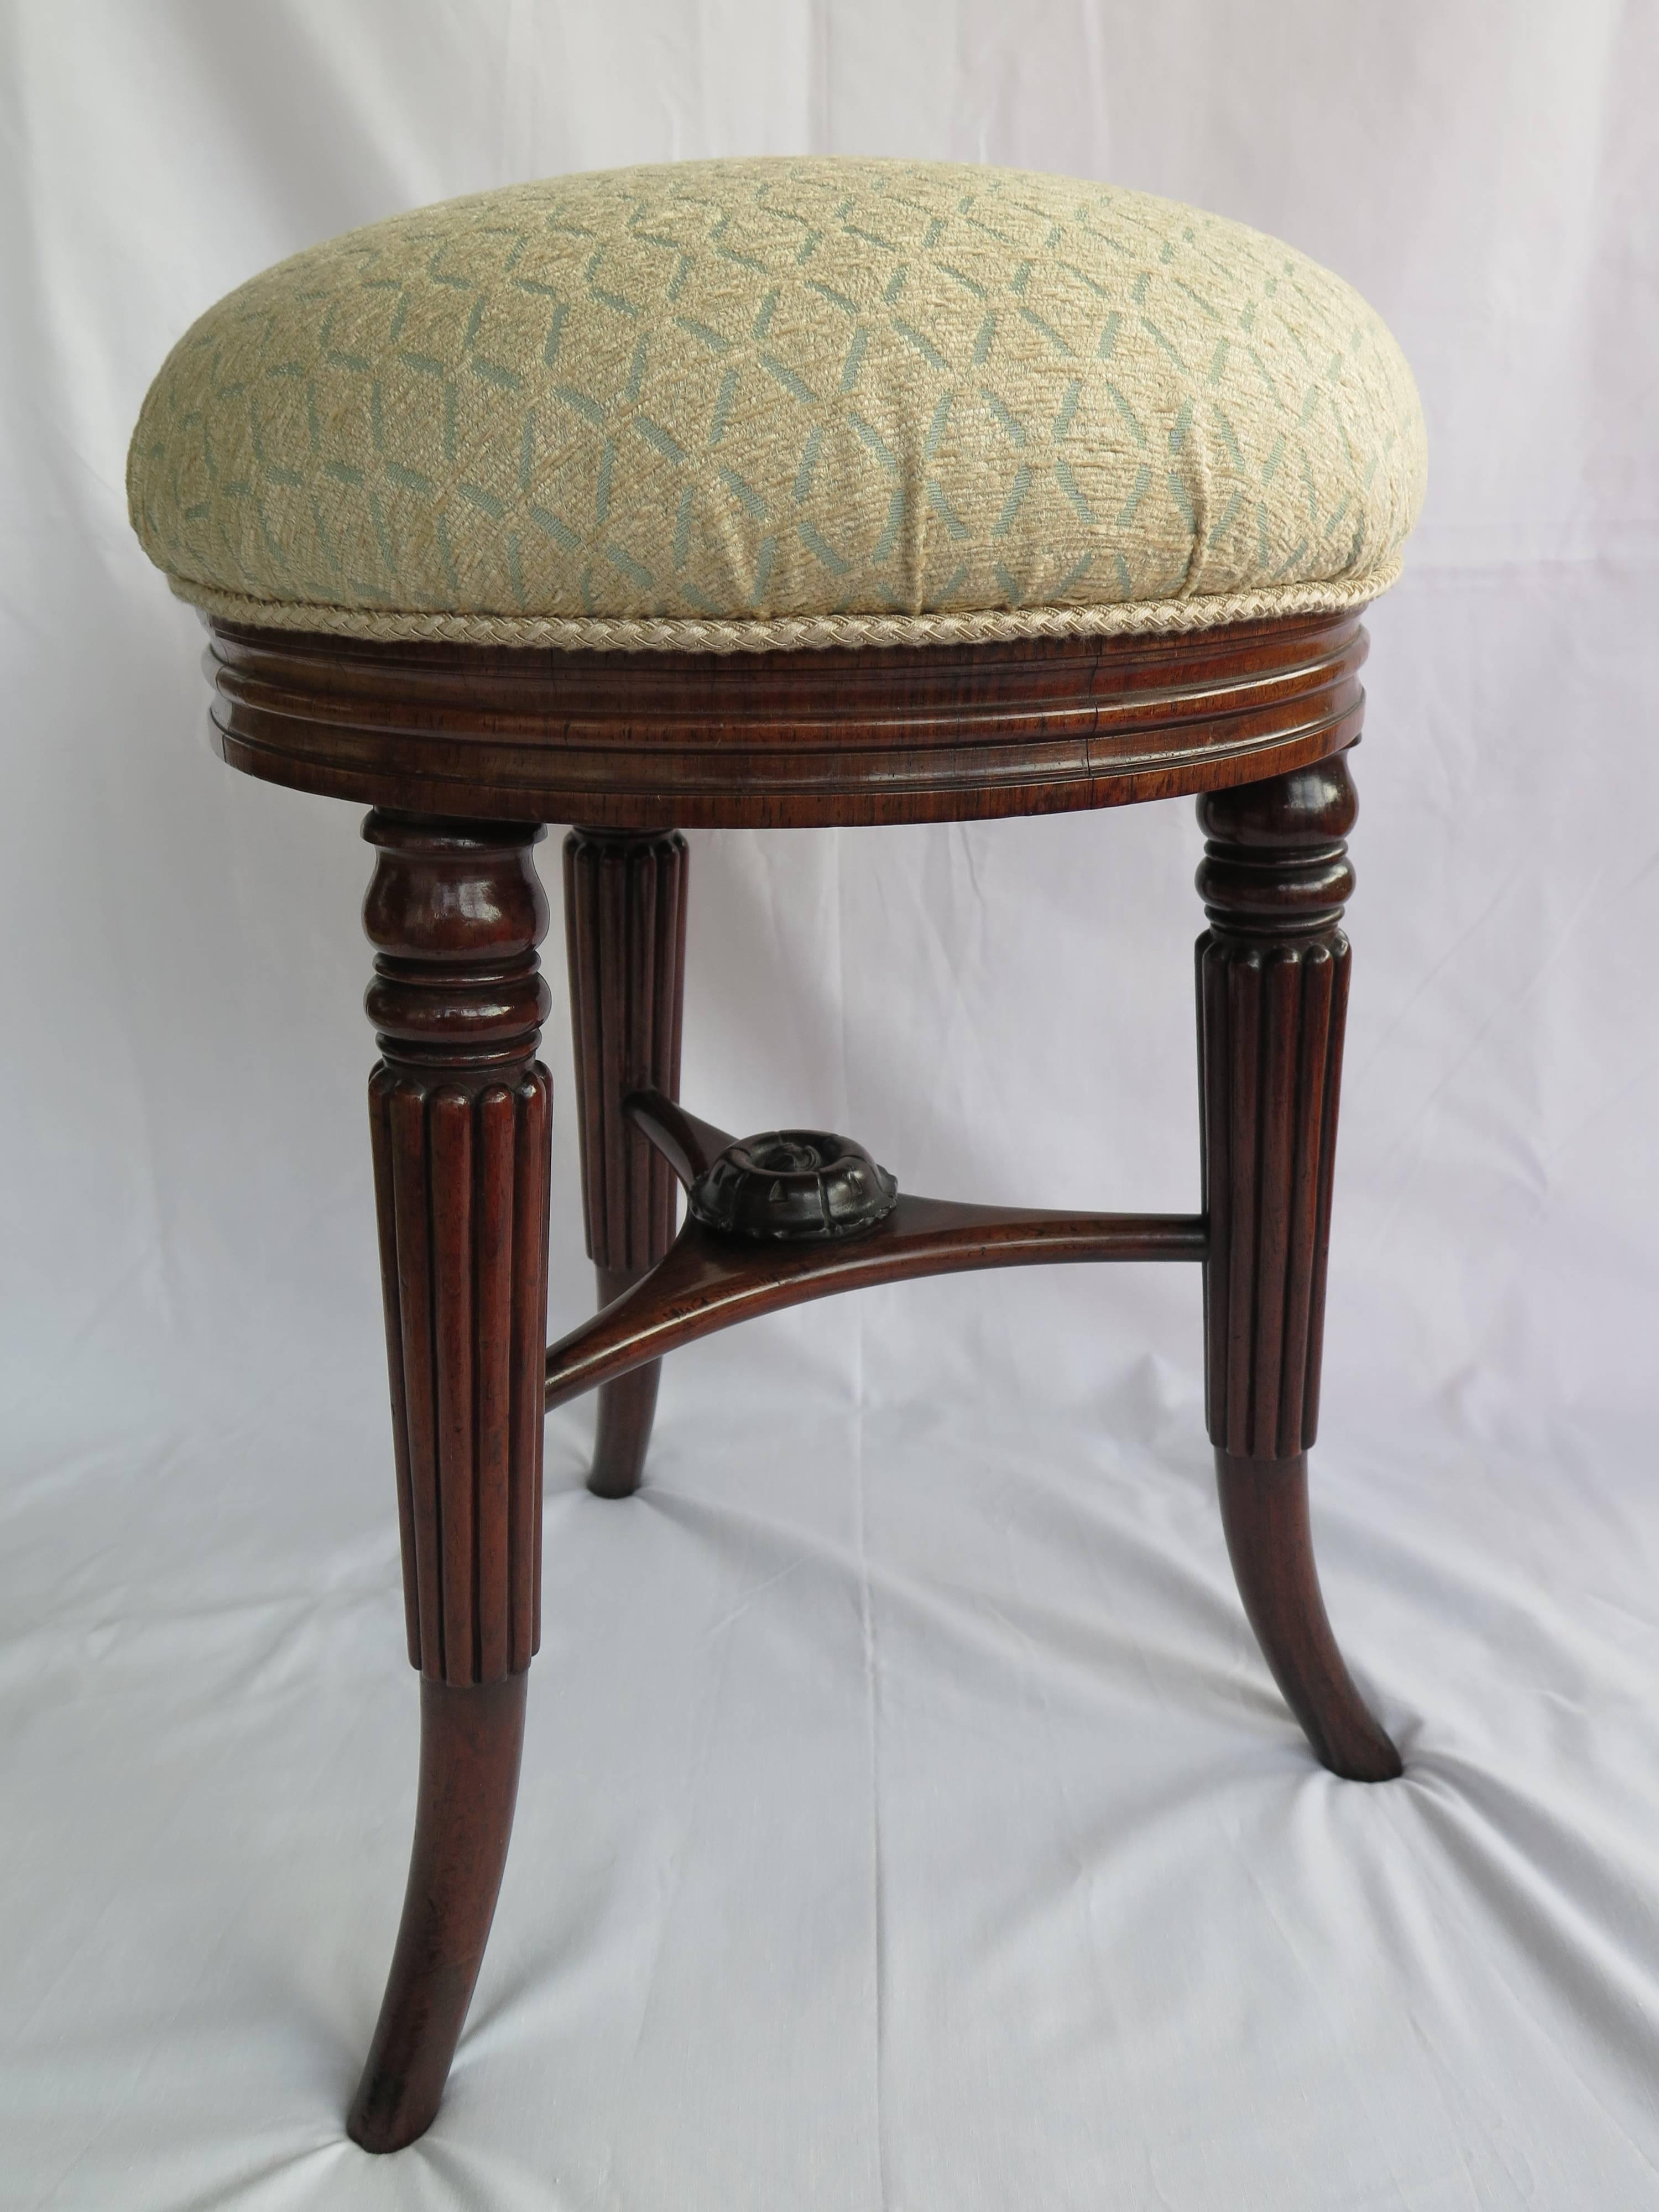 Hand-Crafted Fine, Georgian, Regency Period, STOOL, Reeded, Rosewood, circa 1820